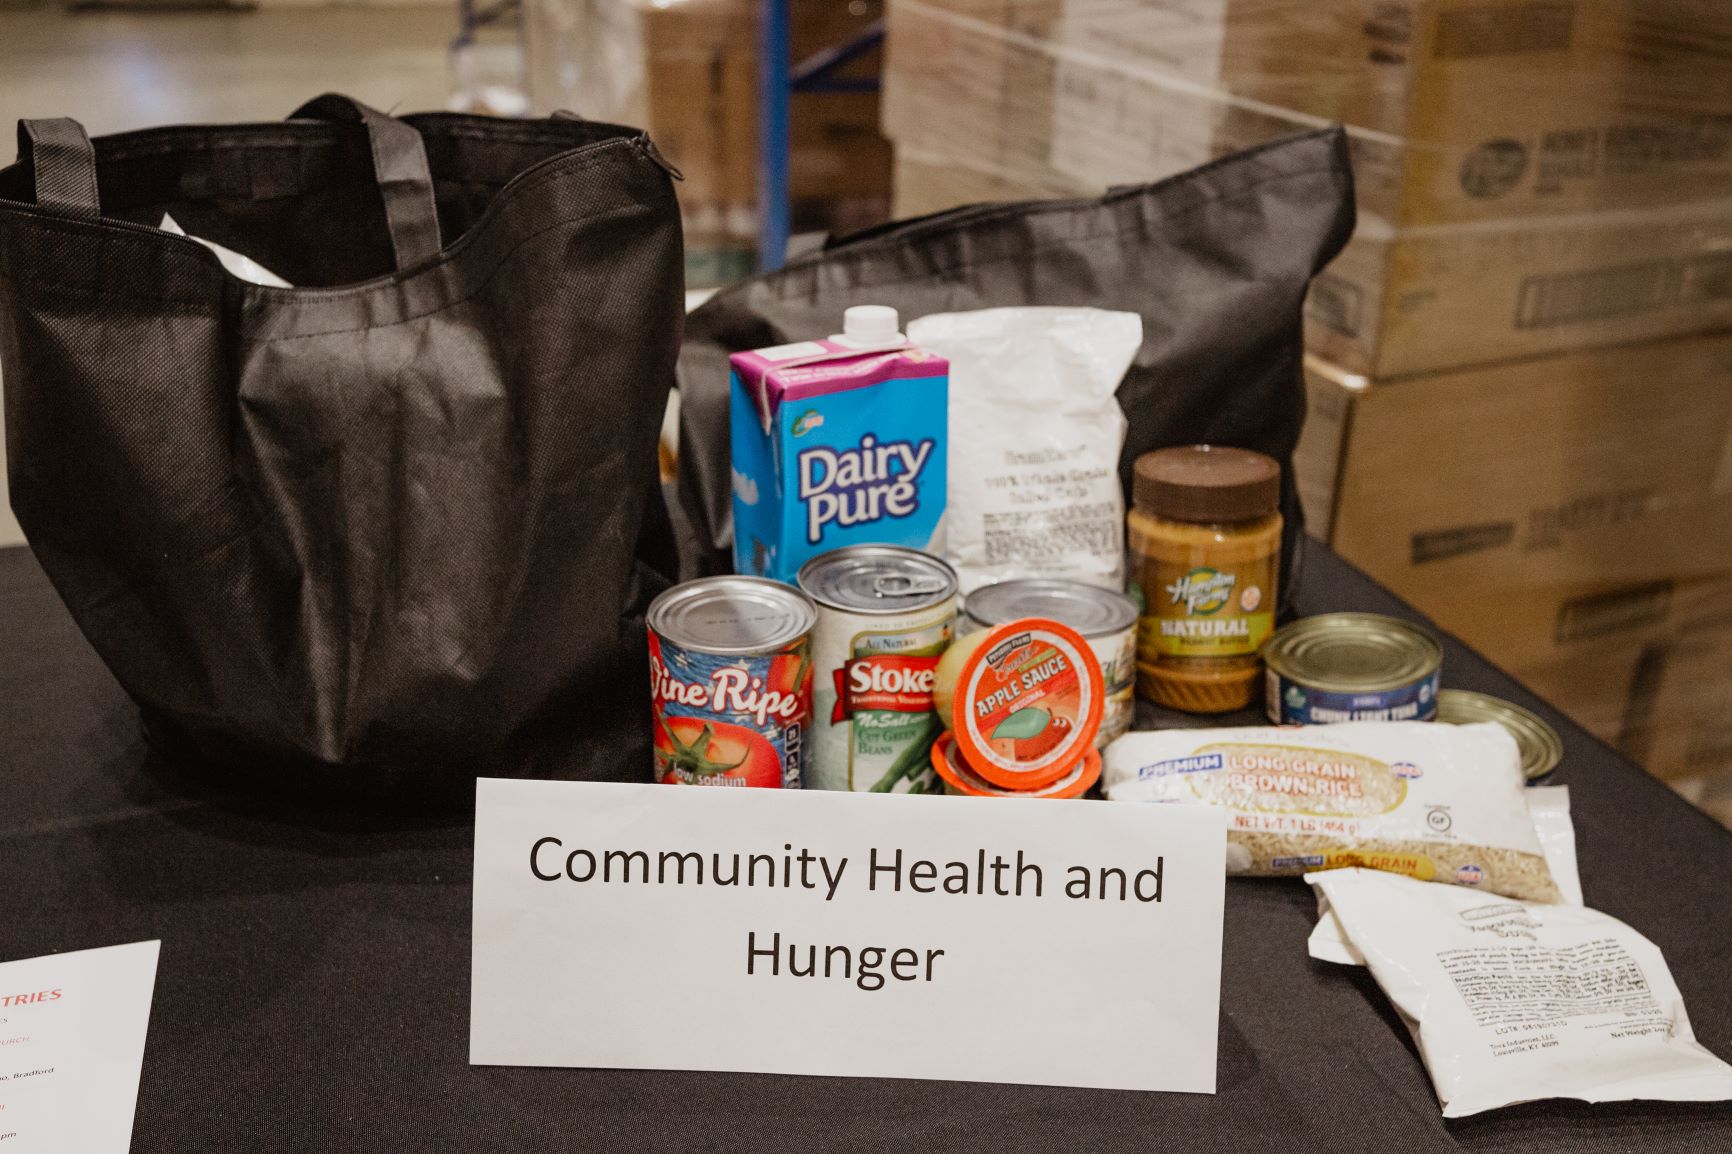 Community Health and Hunger's table display of healthy shelf-stable food and bags.